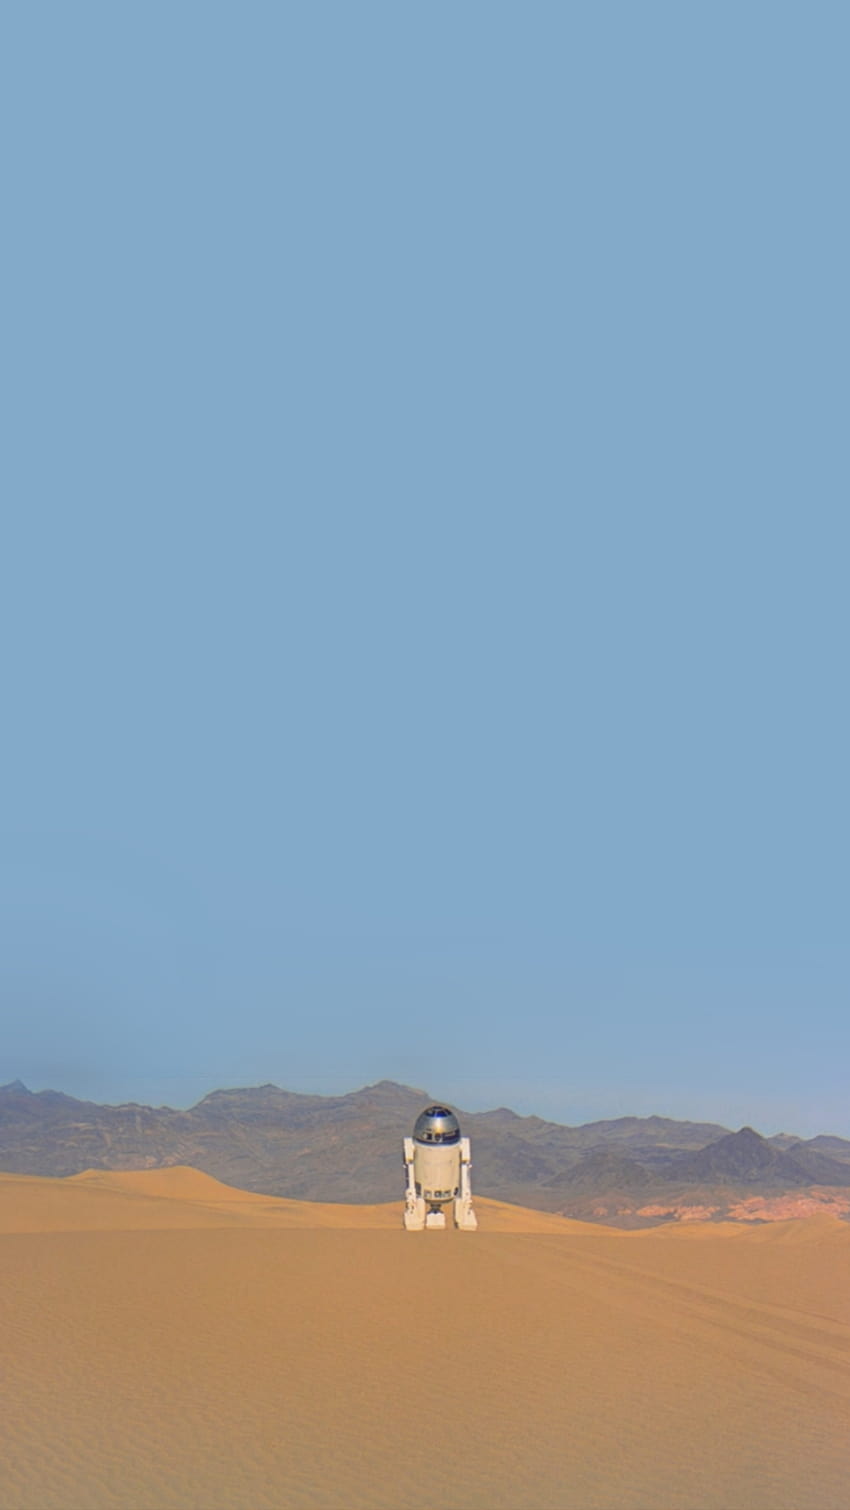 R2D2 in the middle of a desert - Star Wars